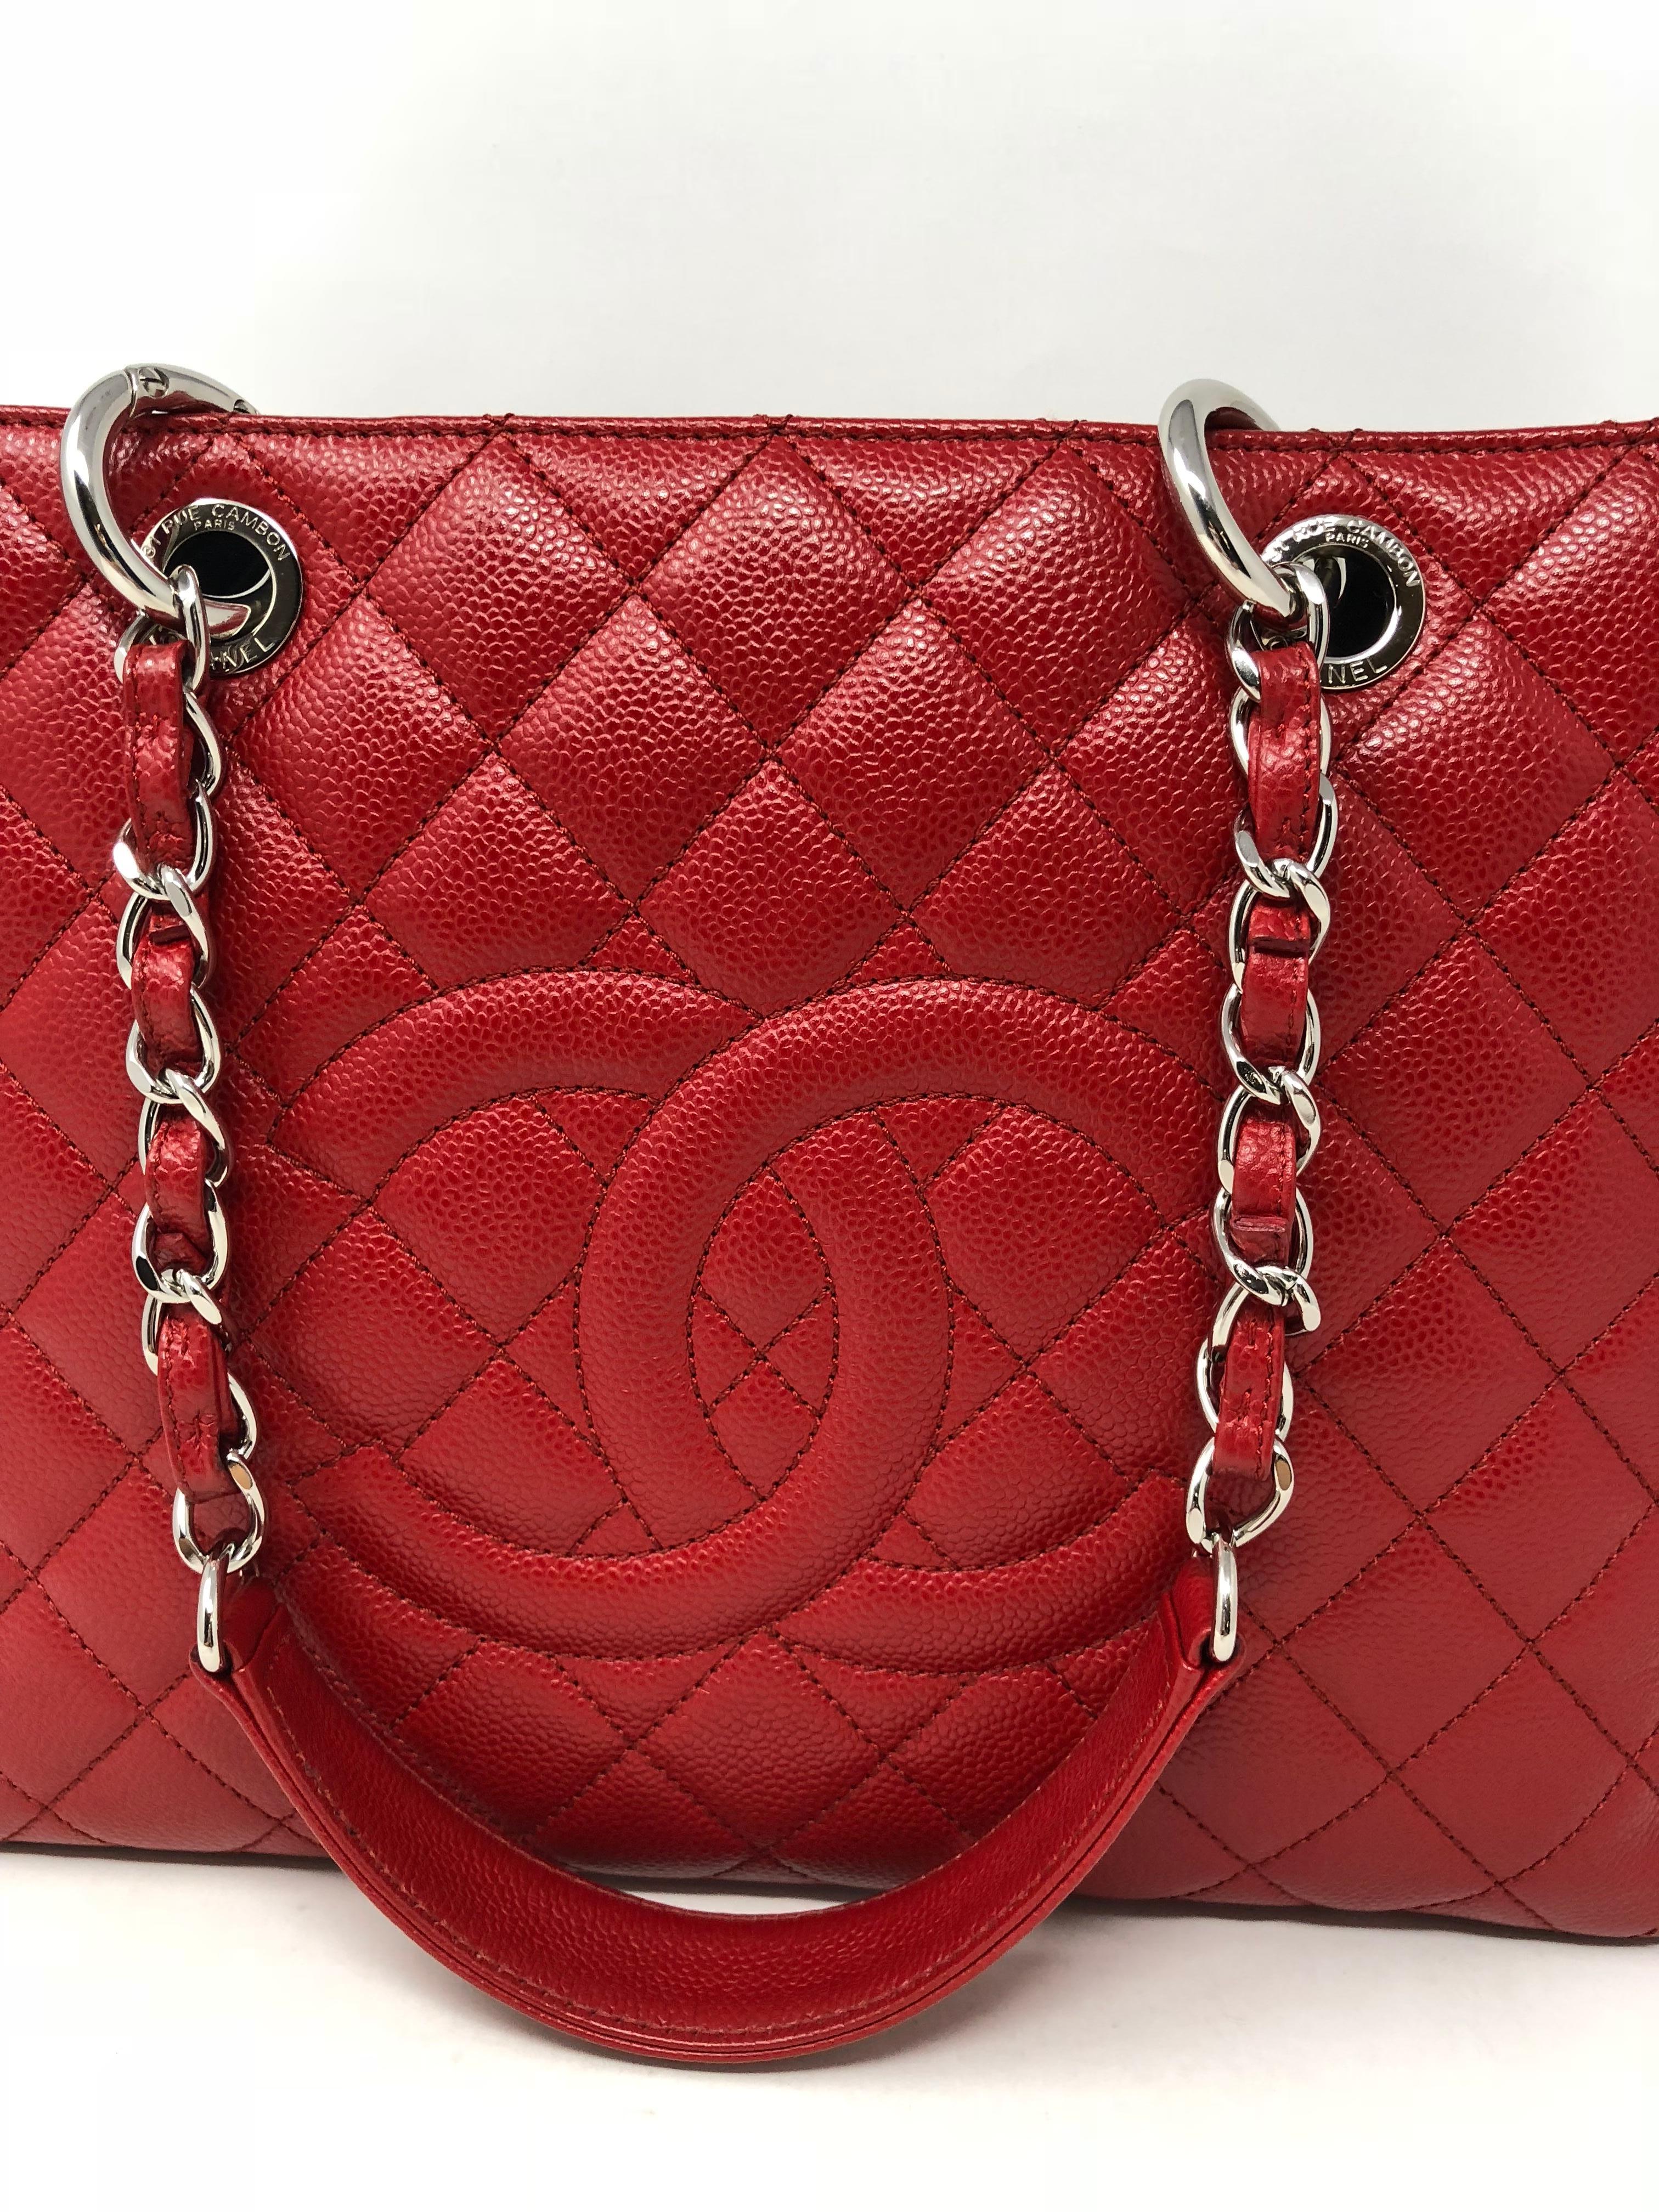 Chanel Red Grand Shopper Tote in Caviar leather with silver hardware. Excellent like new condition. Bright red color in this discontinued style bag from Chanel. Guaranteed authentic. 